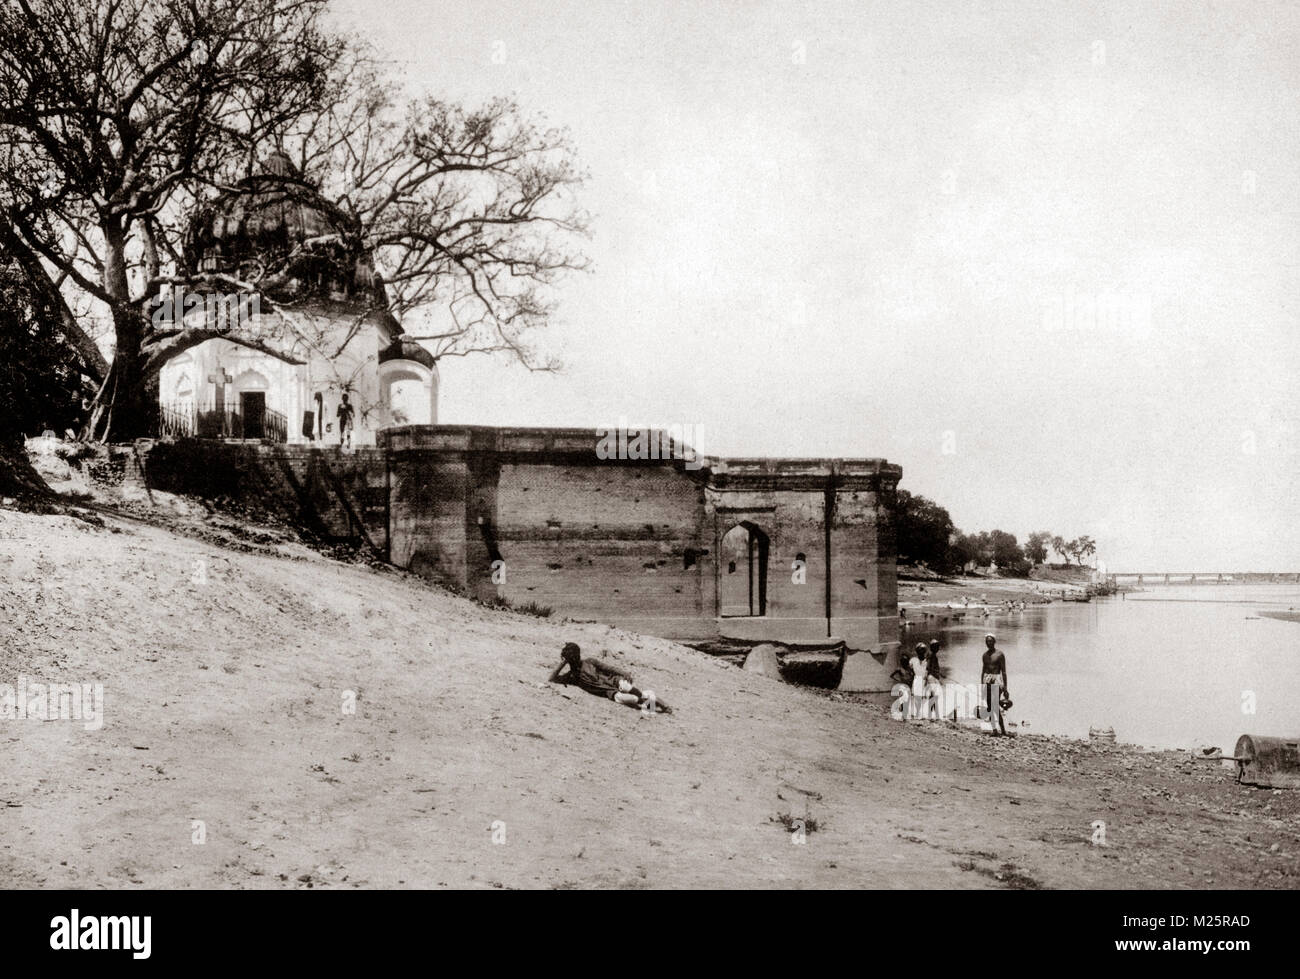 c. 1880s India - Satti Chaura Ghat or Massacre Ghat in Kanpur, Cawnpore, Uttar Pradesh,  bank of the River Ganges - scene of the killing of 300 British men women and children during the Indian rebellion of 1857, Stock Photo